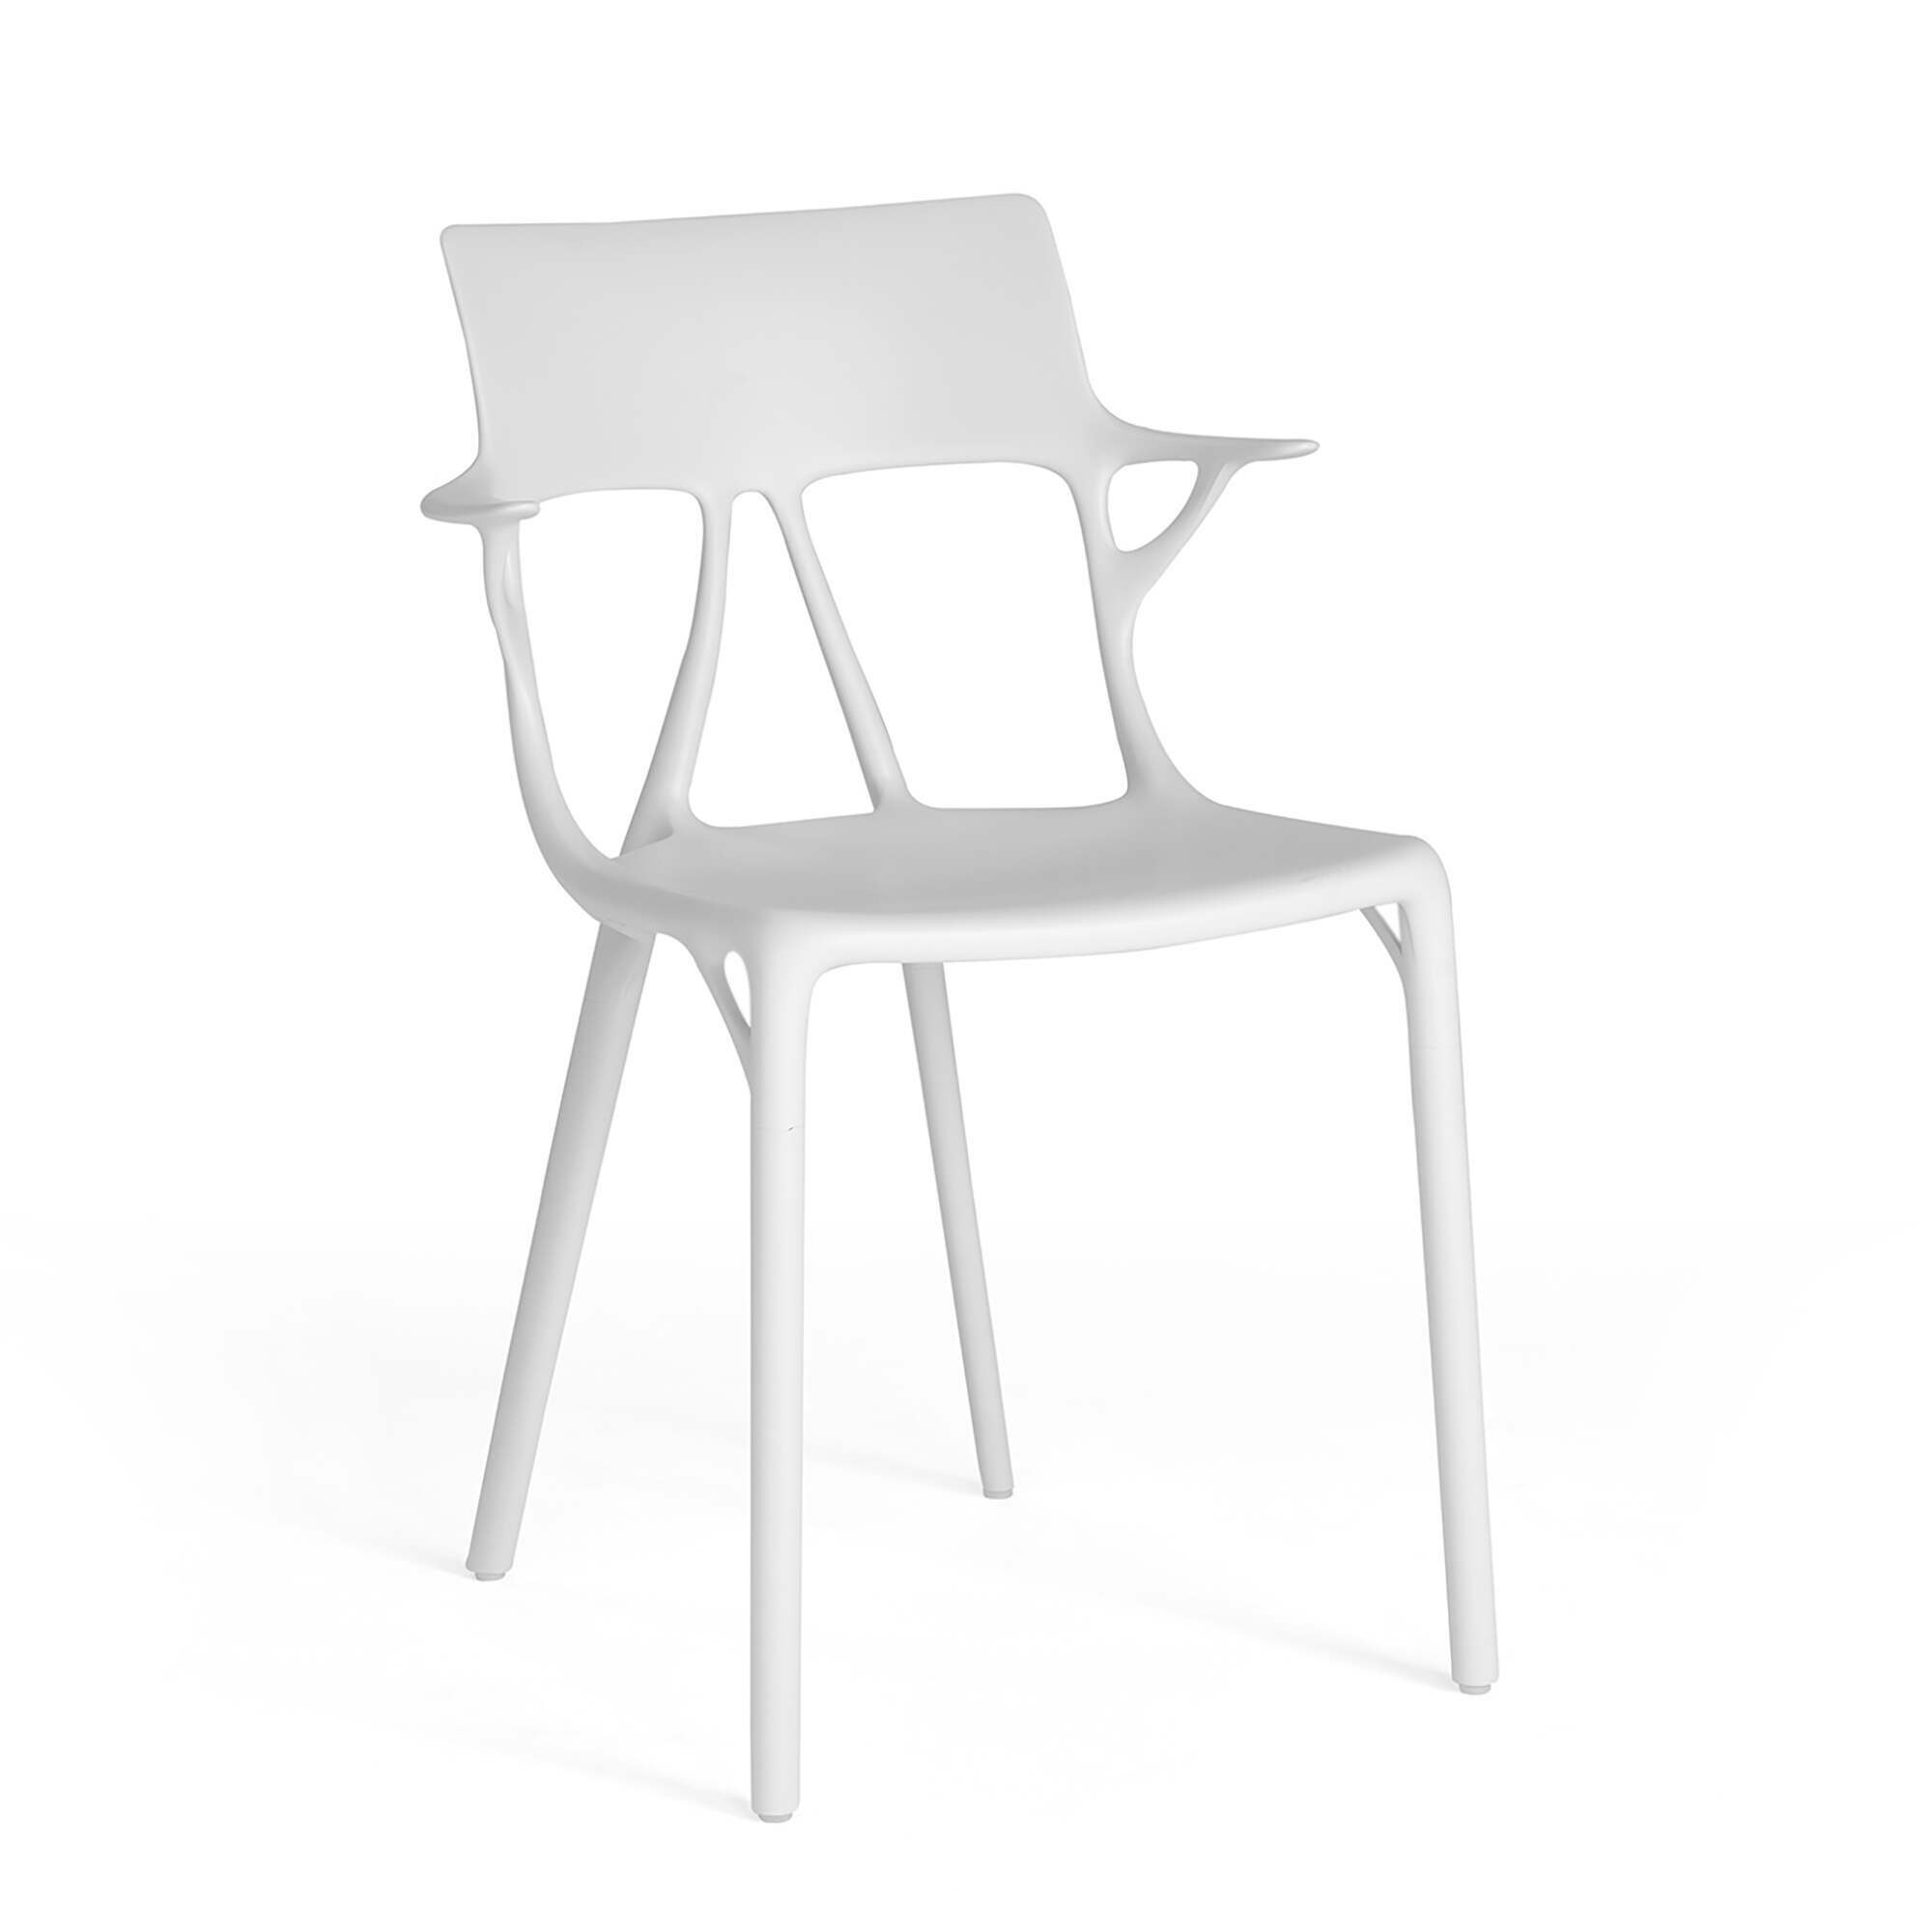 Read more about Graham and green kartell a.i white chair